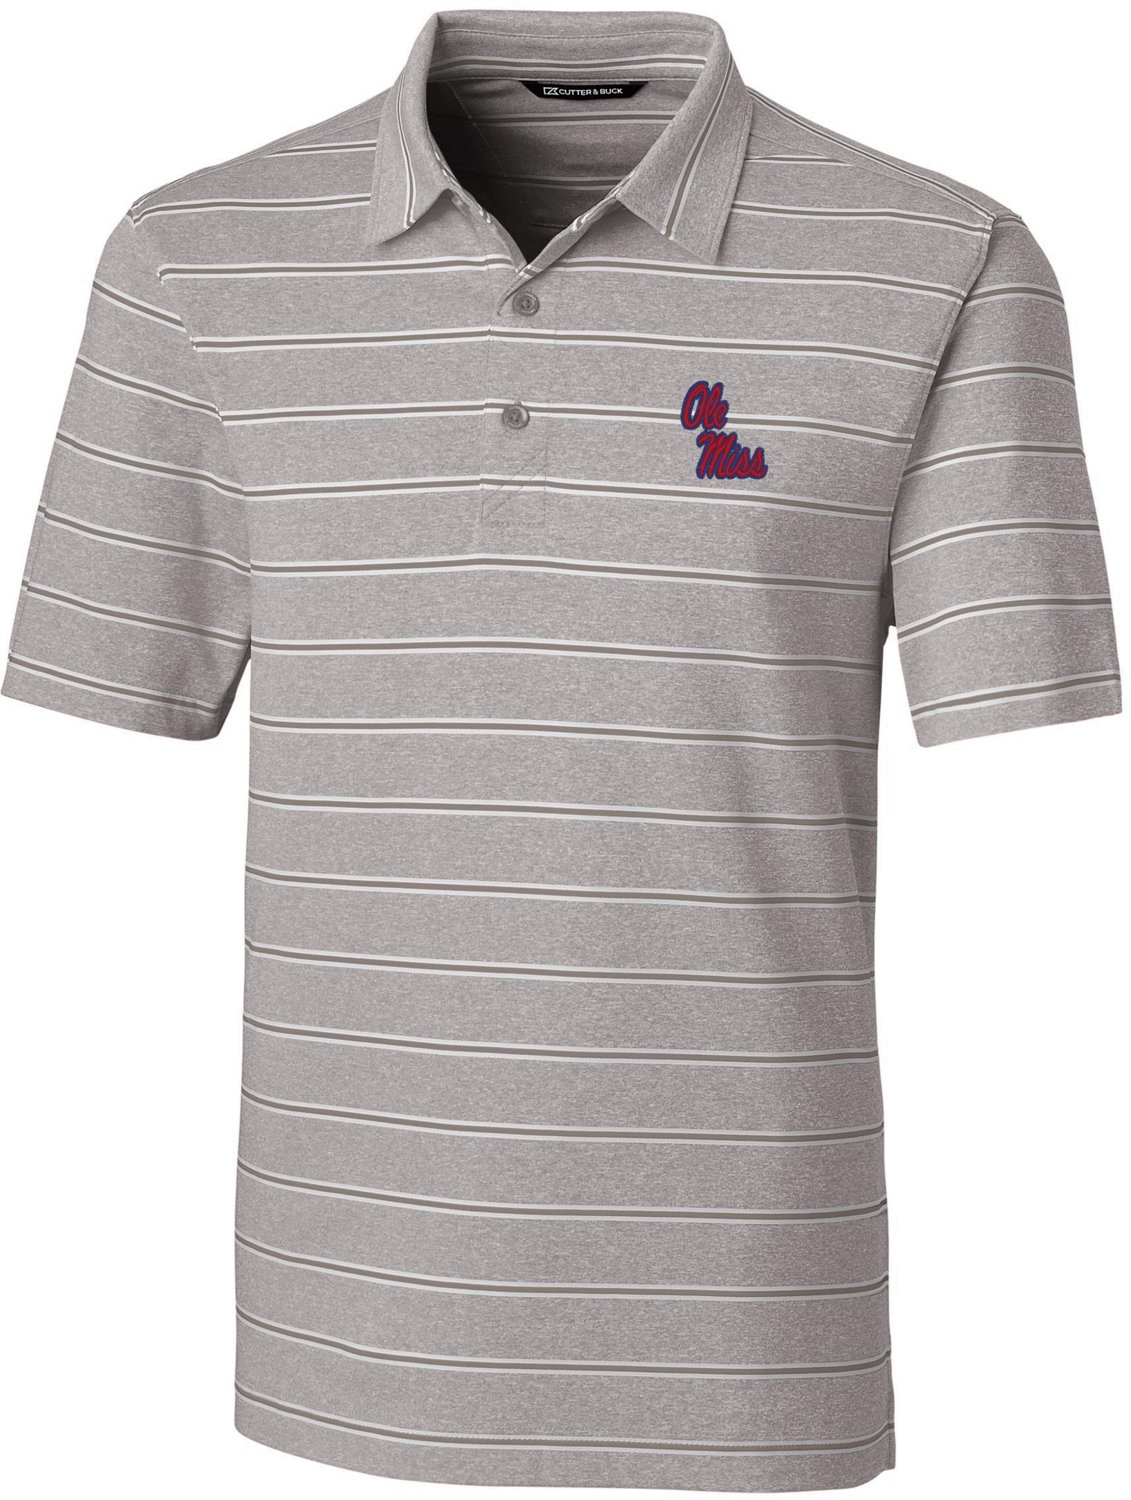 Cutter & Buck Men's University of Mississippi Forge Heather Stripe Polo ...